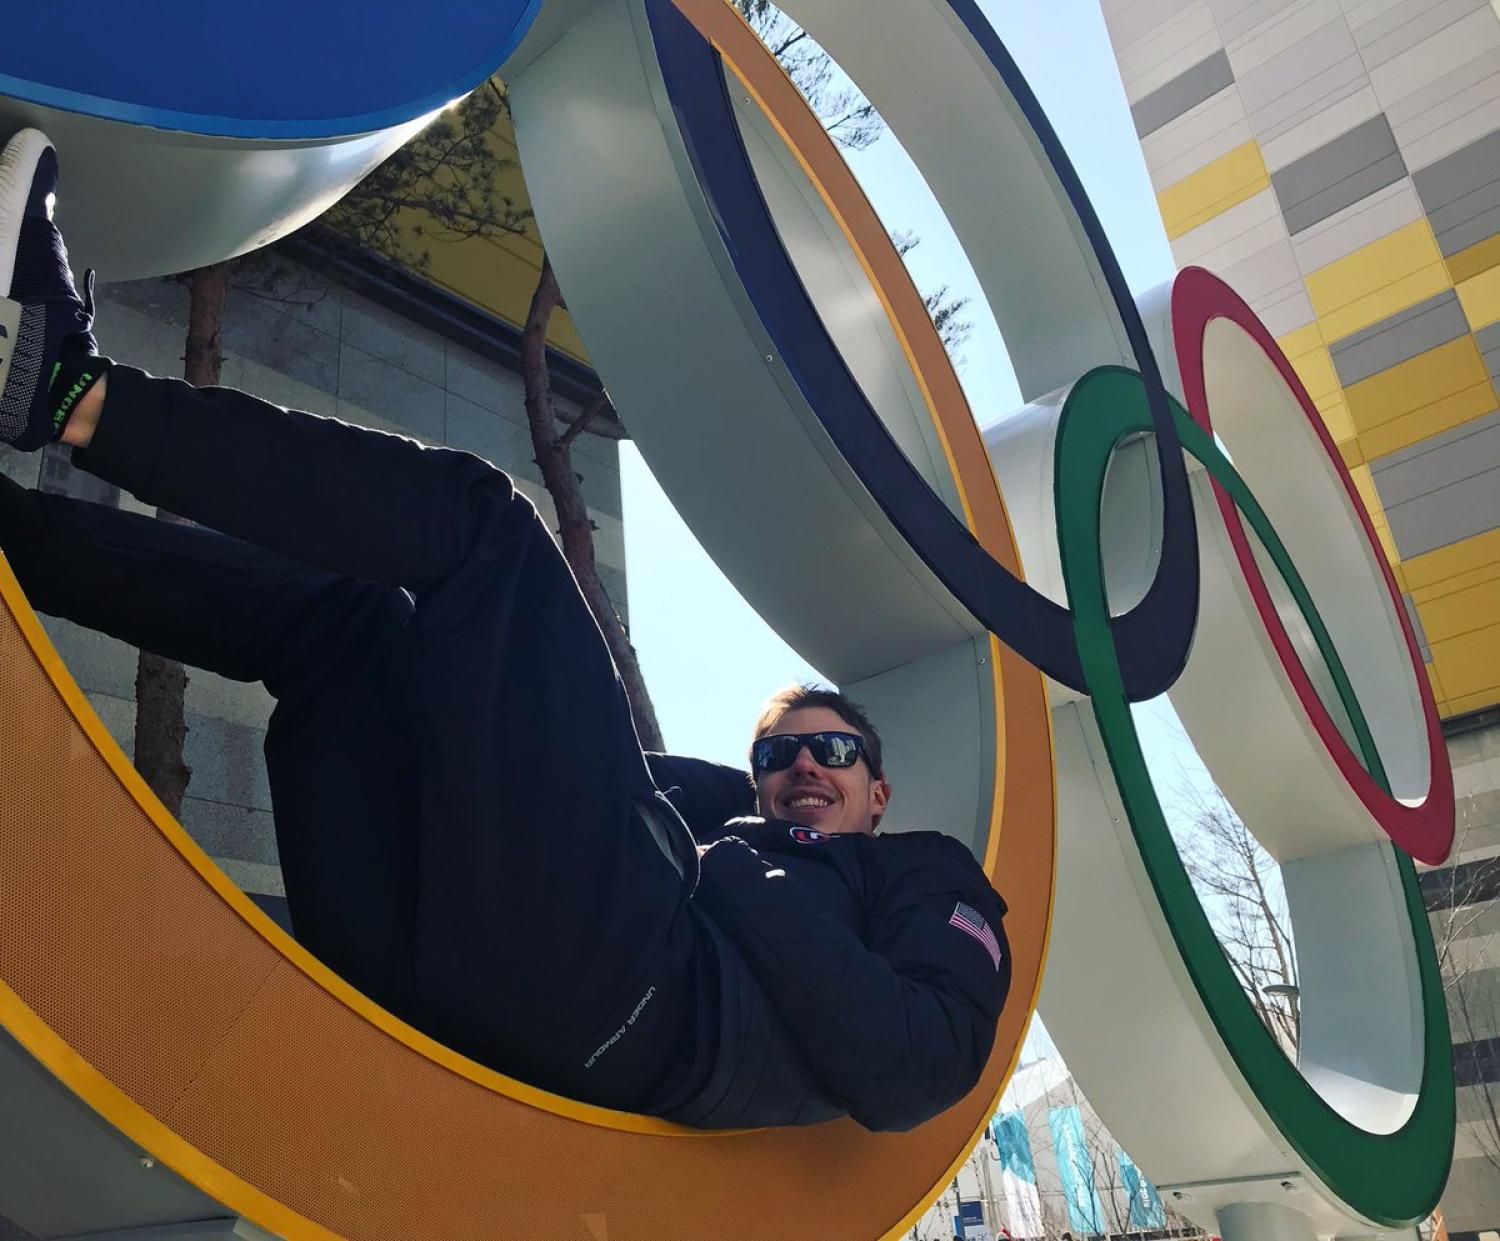 Brian Hansen sits in the Olympic rings